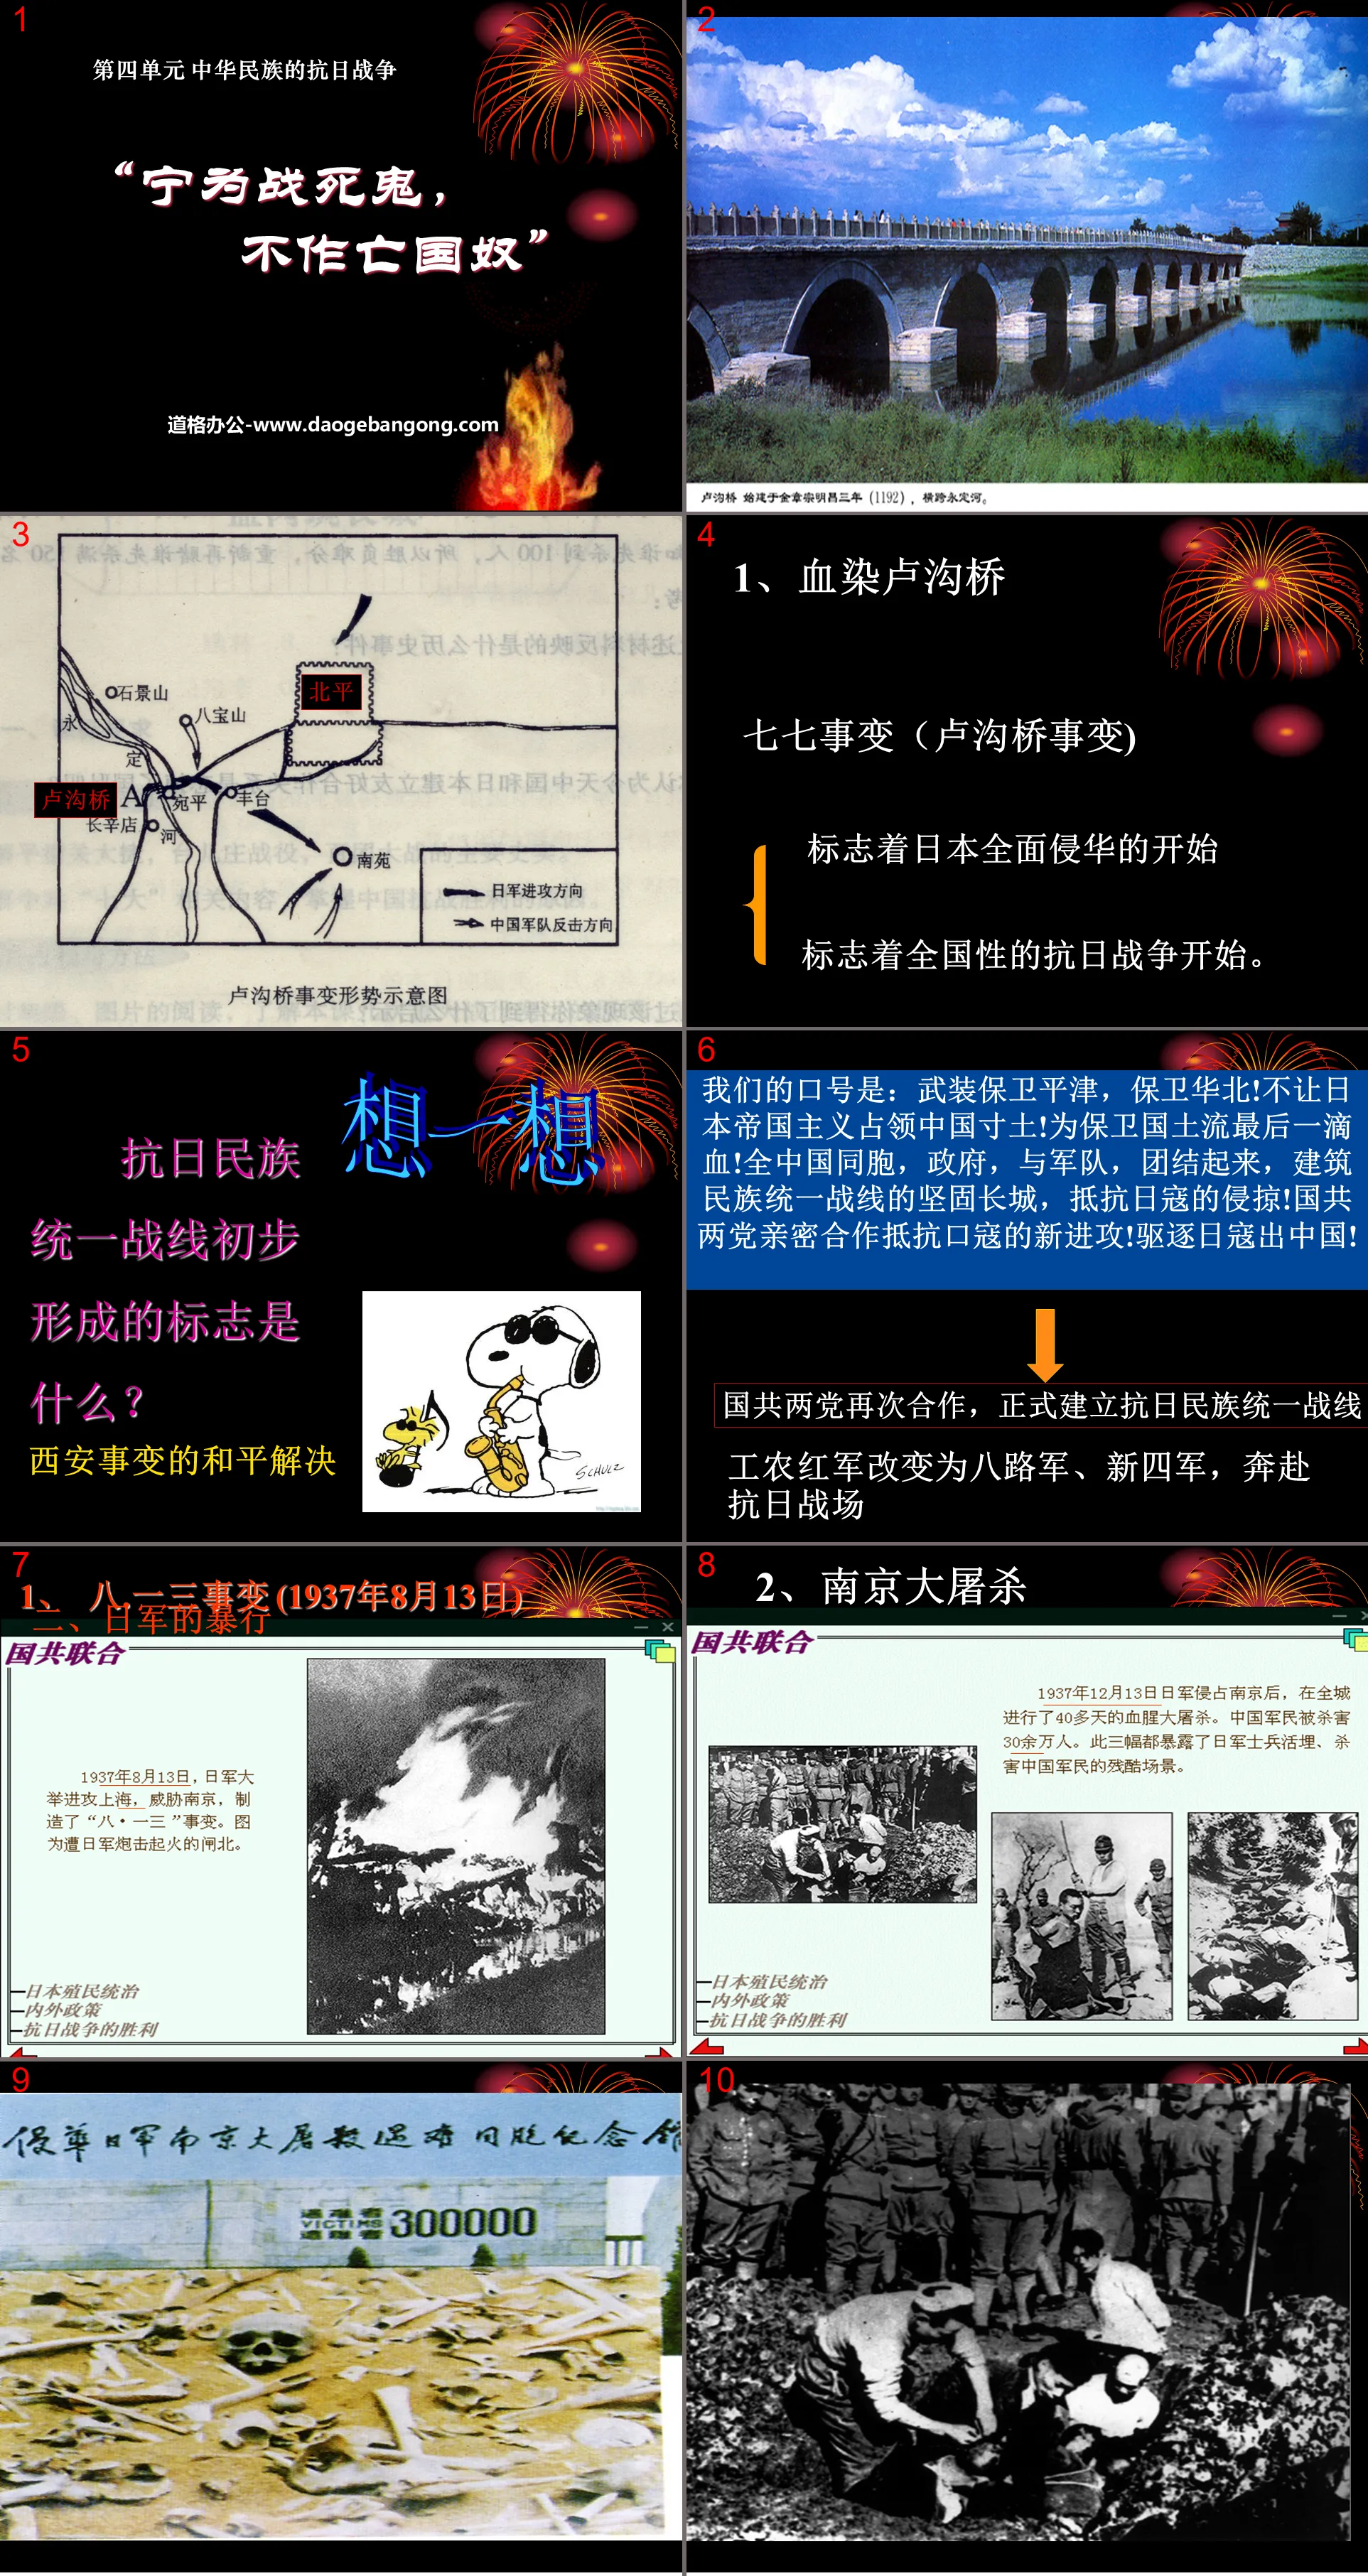 "Better to die in battle than to be a slave to the country's subjugation" The Chinese nation's Anti-Japanese War PPT courseware 2